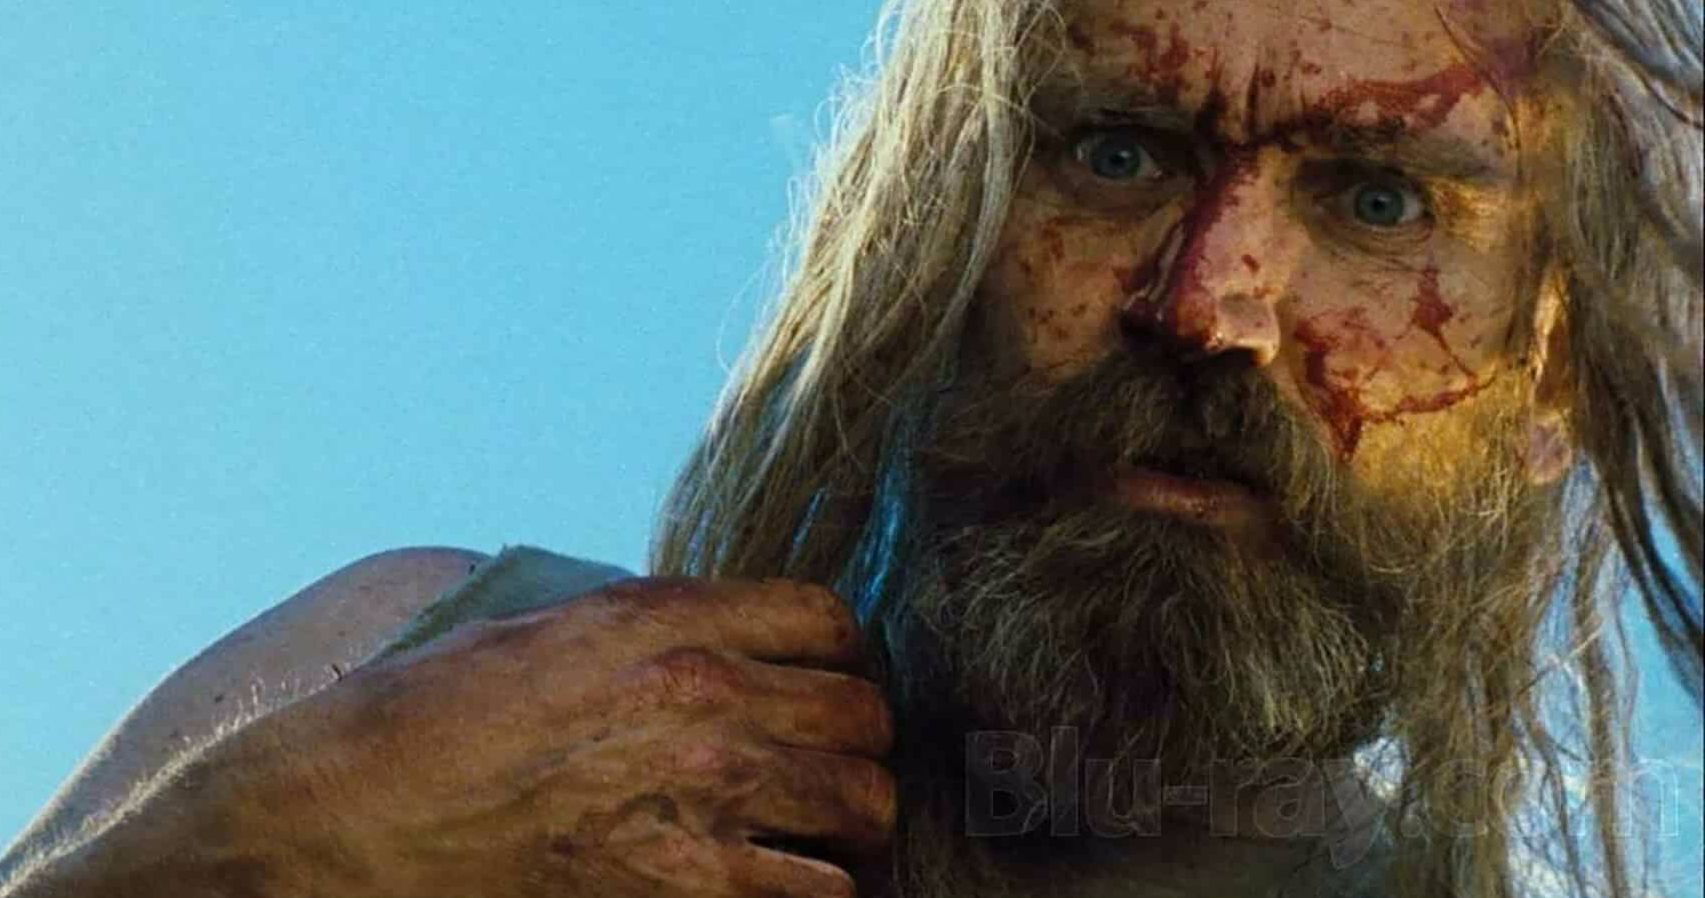 Rob Zombie Continues 3 from Hell Trailer Countdown with Creepy New Look at Otis